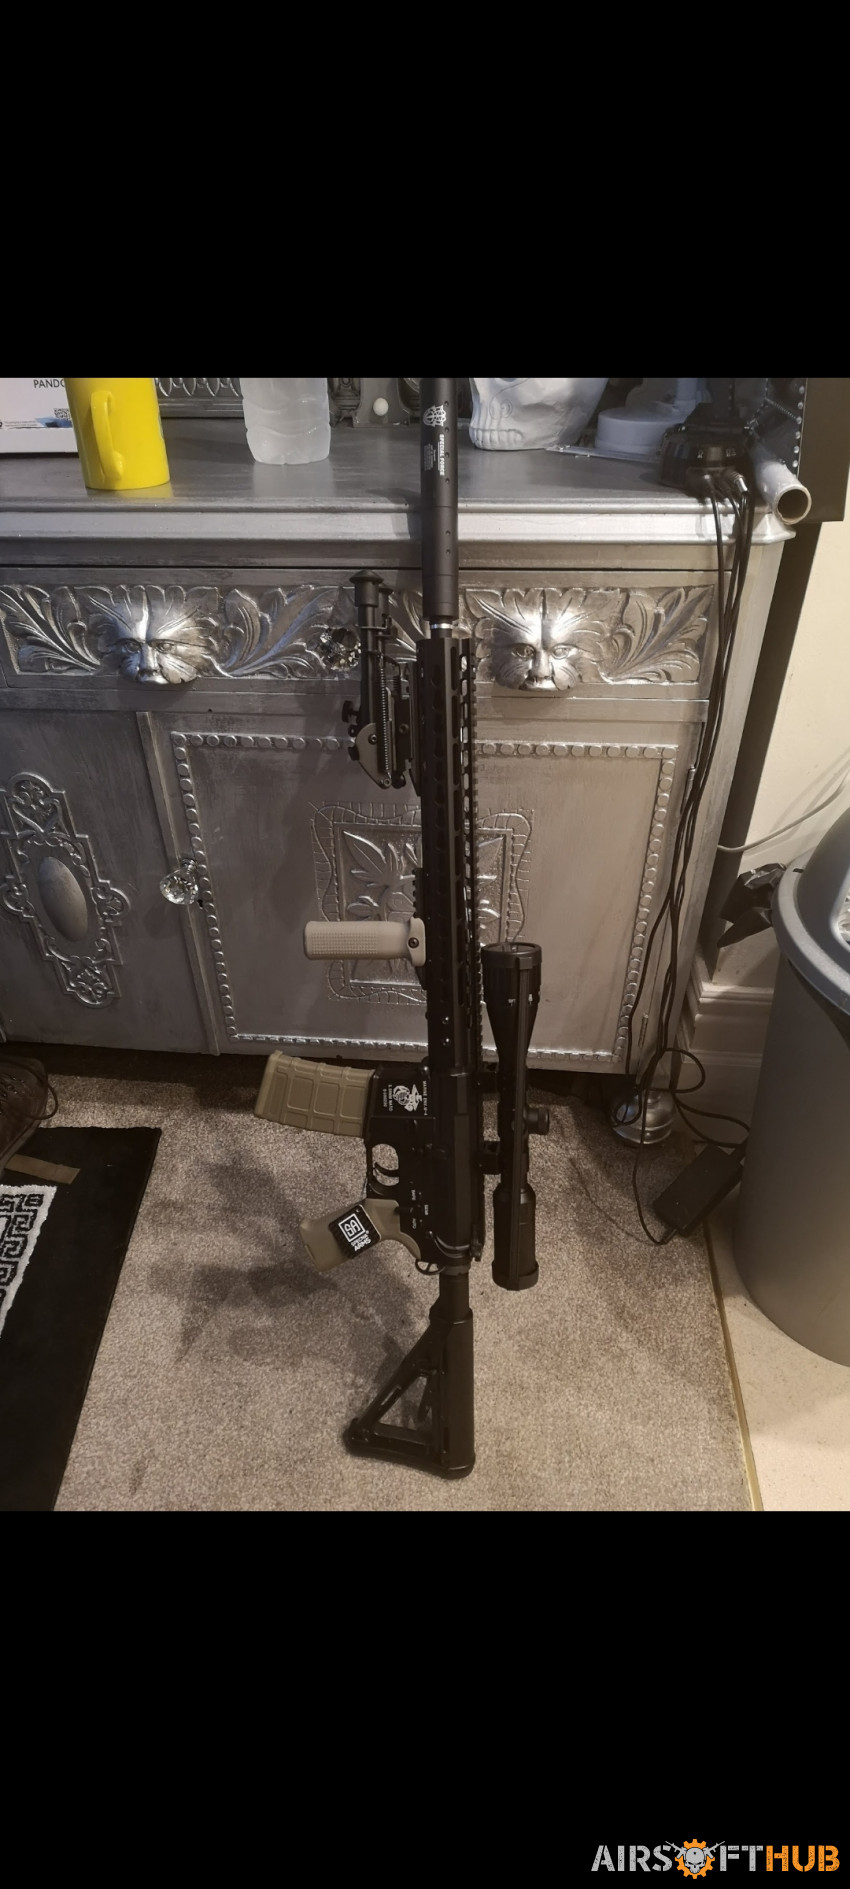 Ideal dmr base - Used airsoft equipment